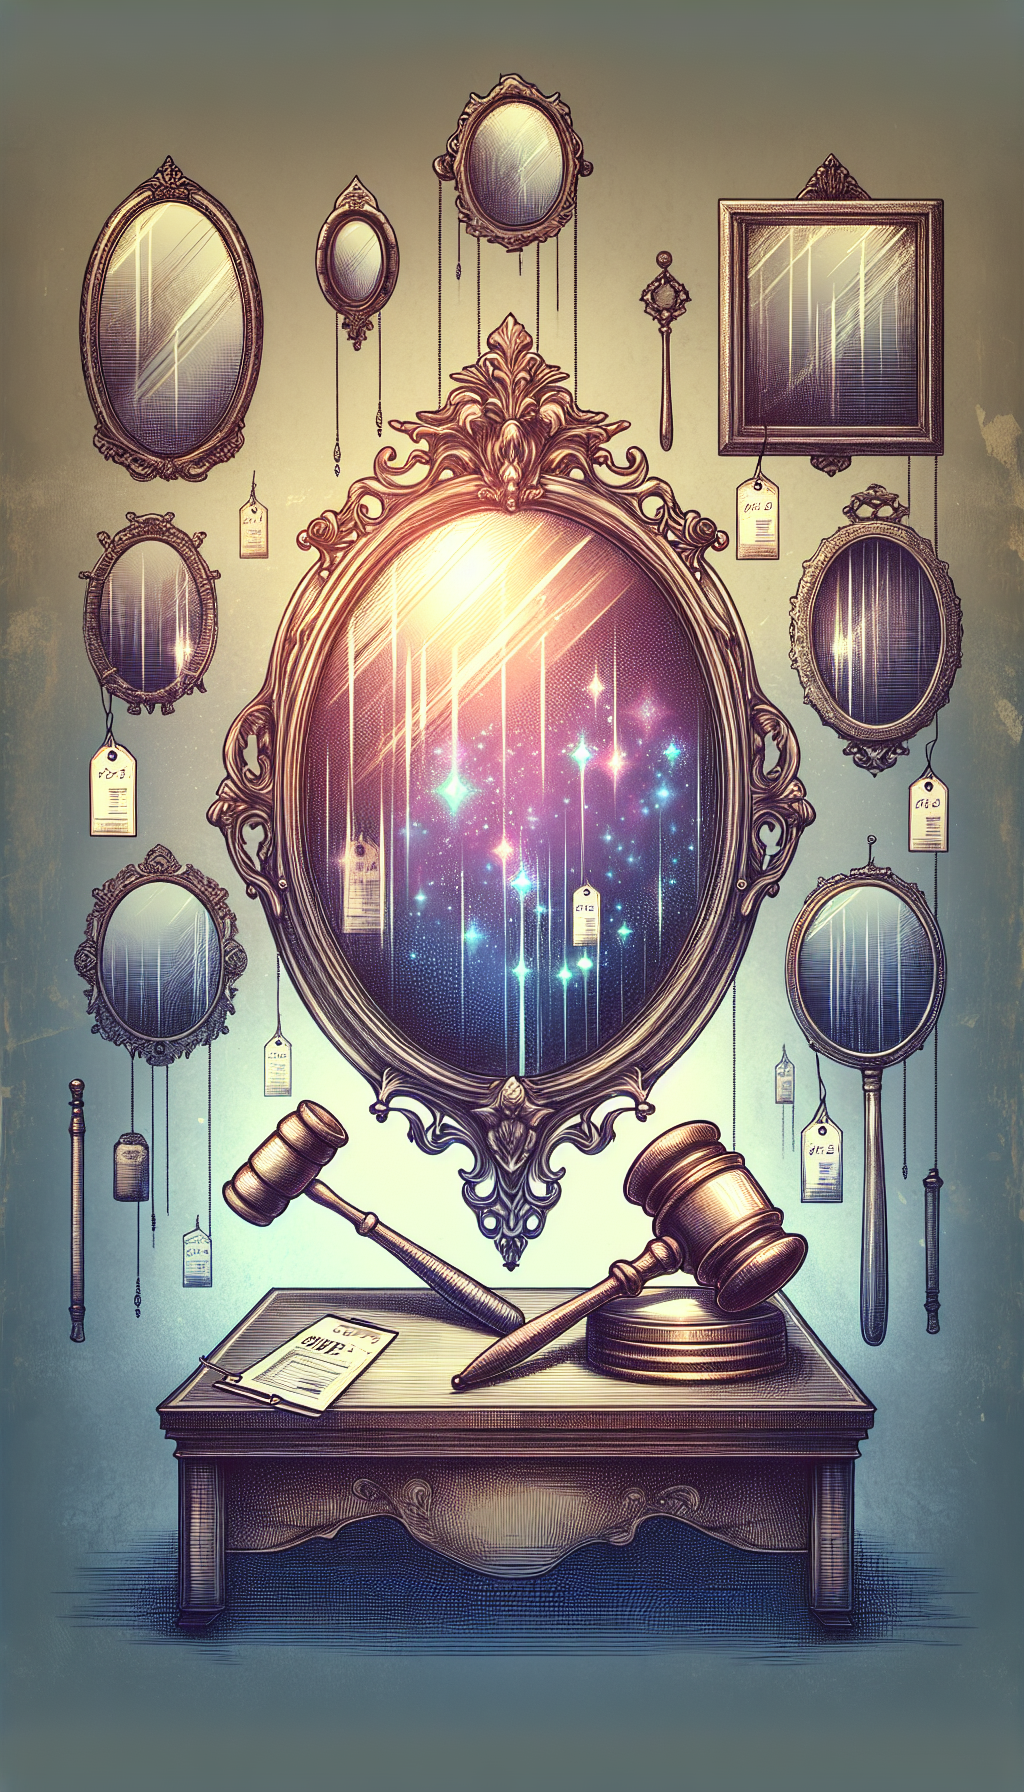 An illustration depicts an ornate antique mirror reflecting a gavel and an auctioneer's paddle, placed amid a fading gradient representing time's passage. Different styles of mirror frames and valuables are subtly etched into the background, symbolizing the diversity in valuation based on condition and originality, while sparkling price tags hover like specters around the mirror's reflective surface.